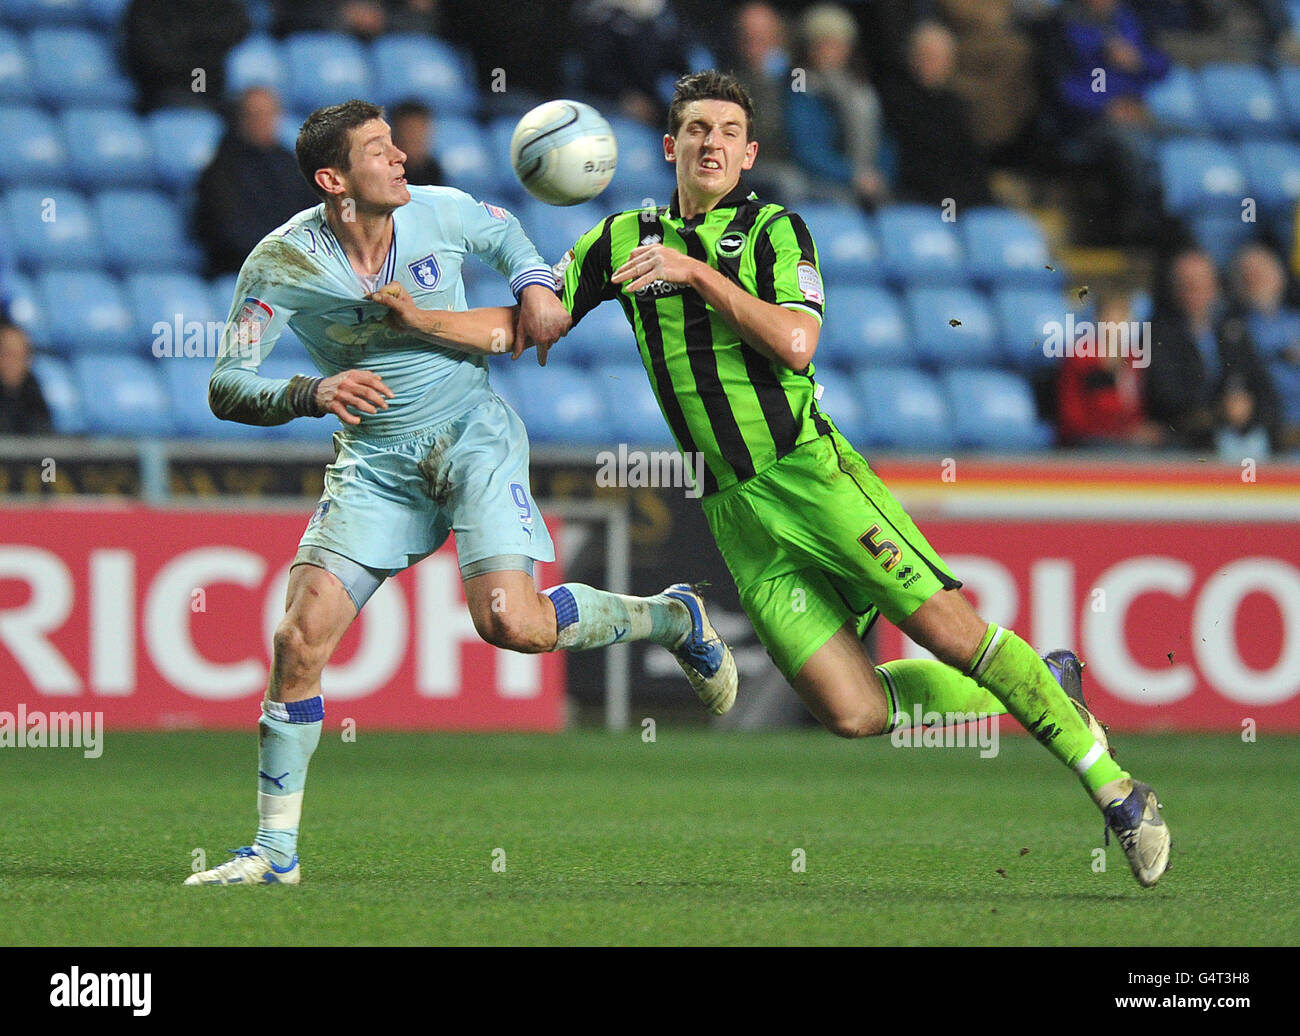 Coventry City's Lucas Jutkiewicz and Brighton & Hove Albion's Lewis Dunk battle for the ball during the npower Championship match at the Ricoh Arena, Coventry. Stock Photo